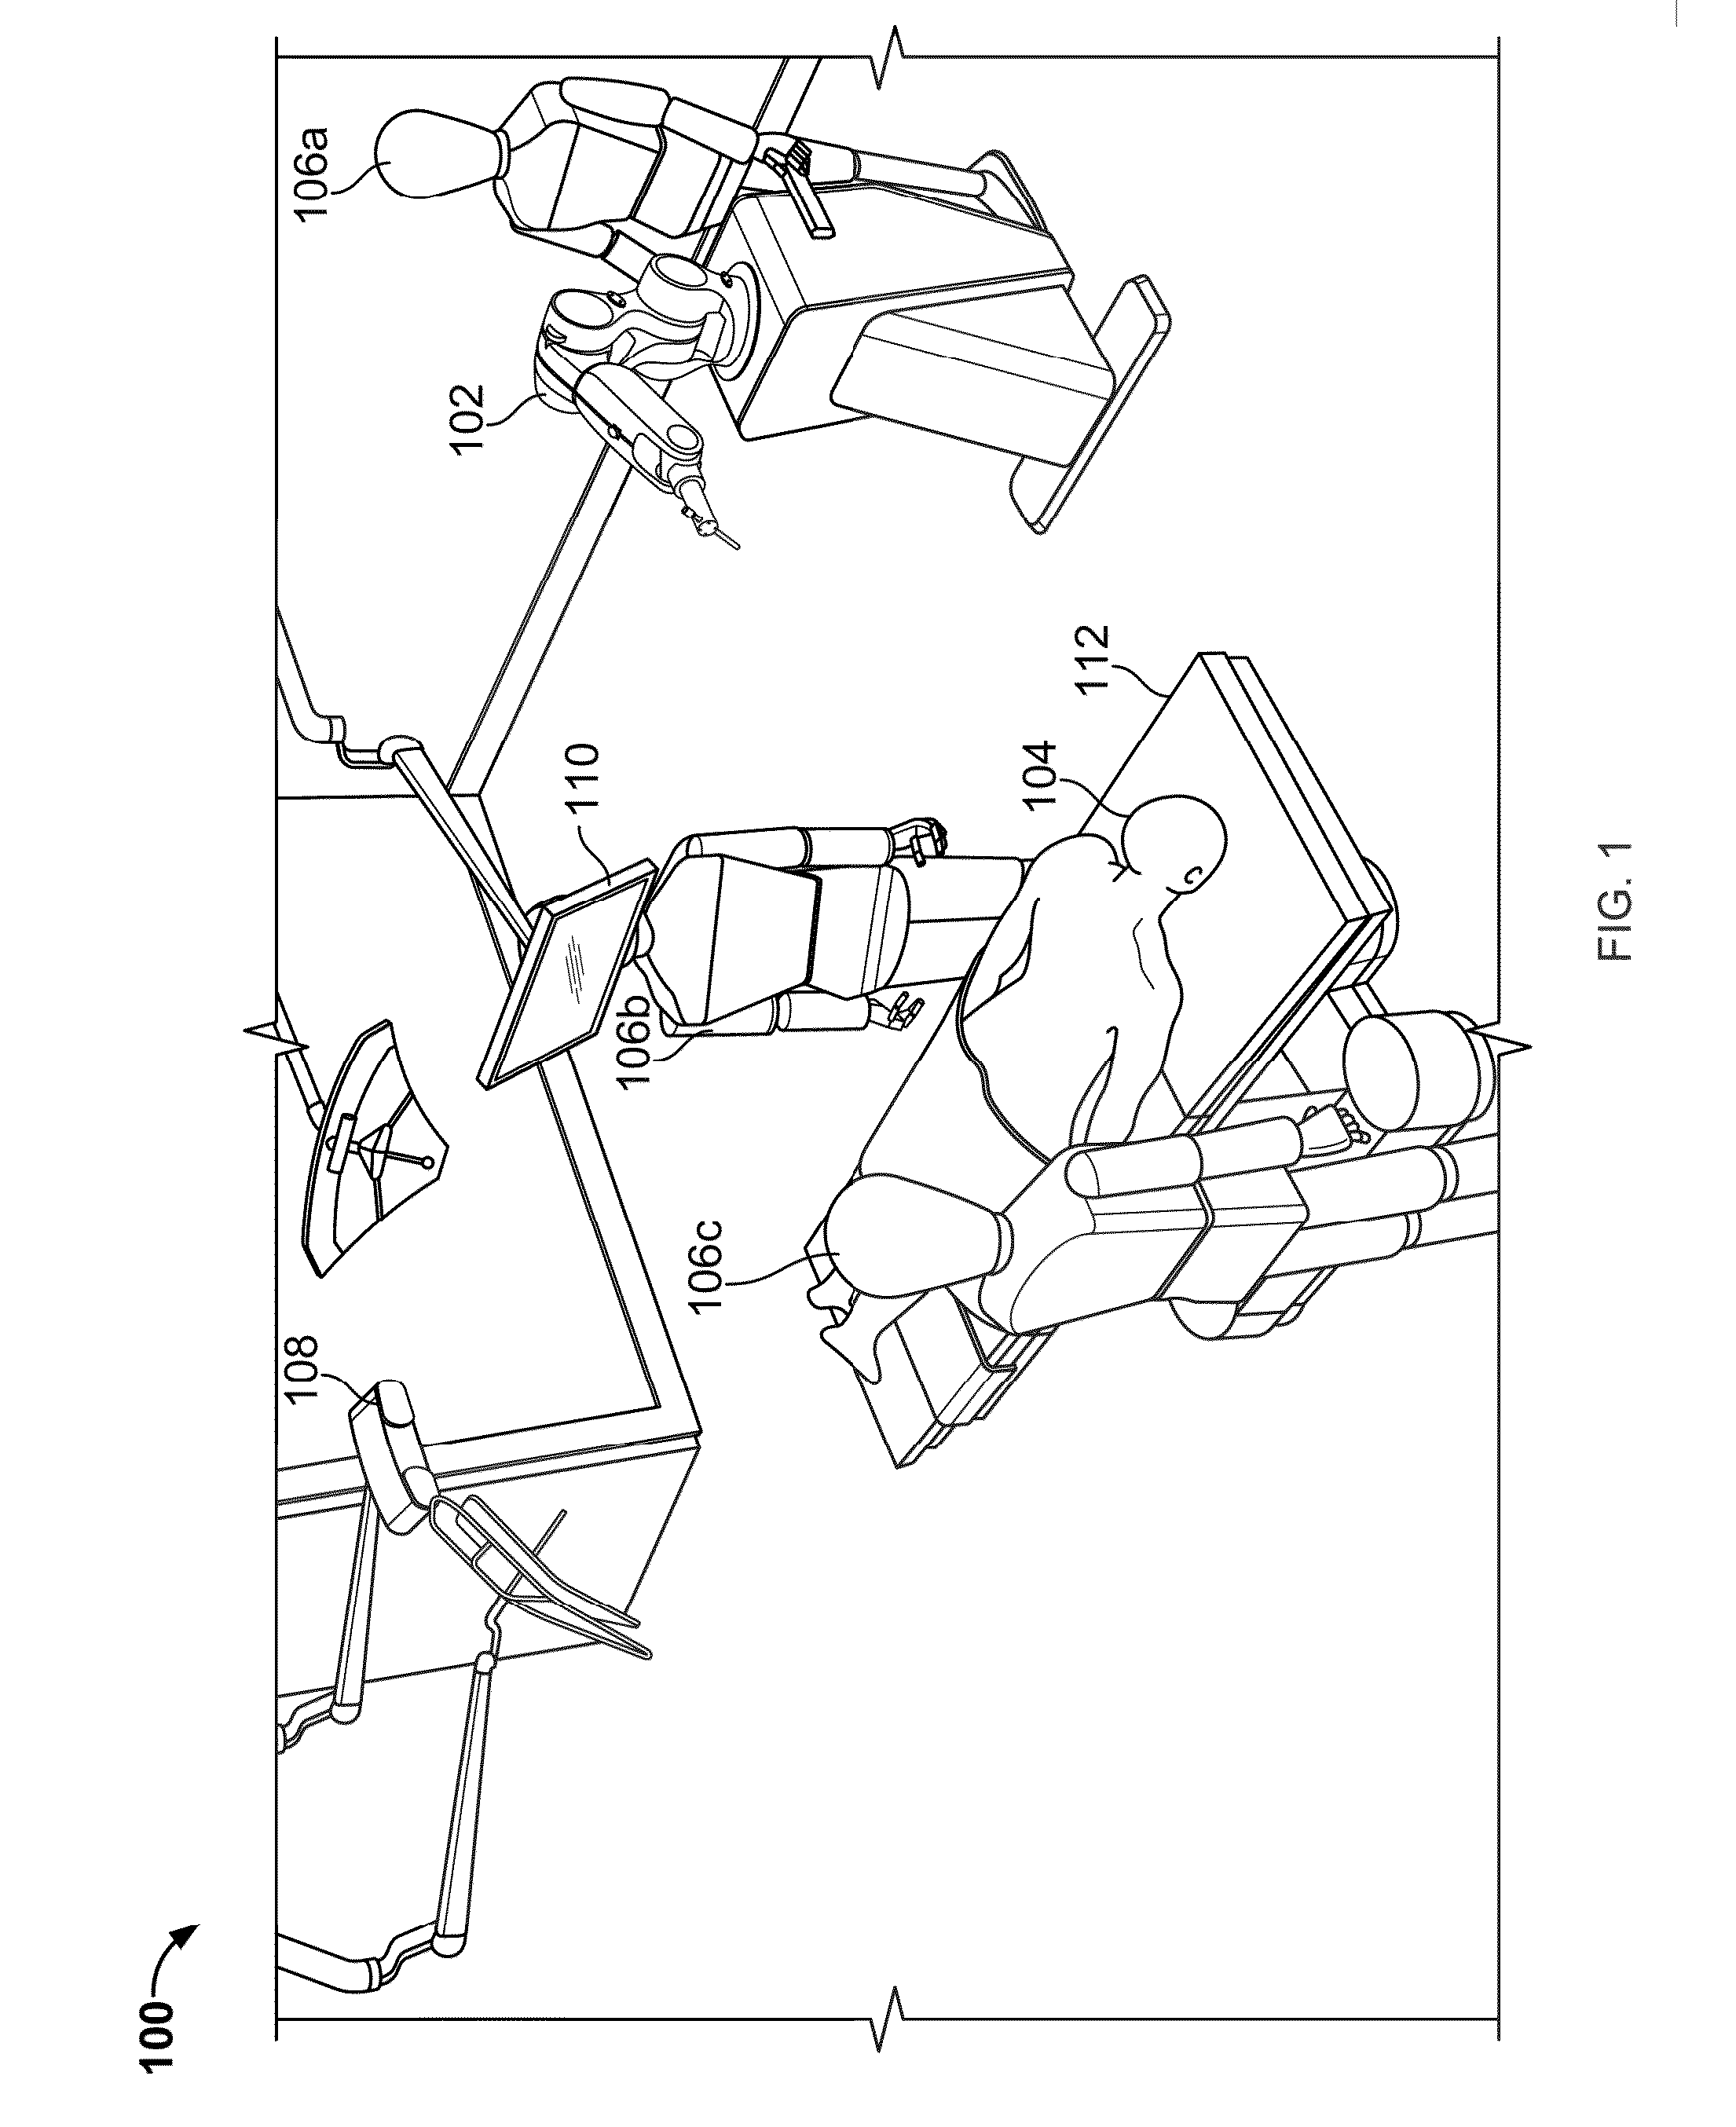 Systems and methods for performing minimally invasive spinal surgery with a robotic surgical system using a percutaneous technique